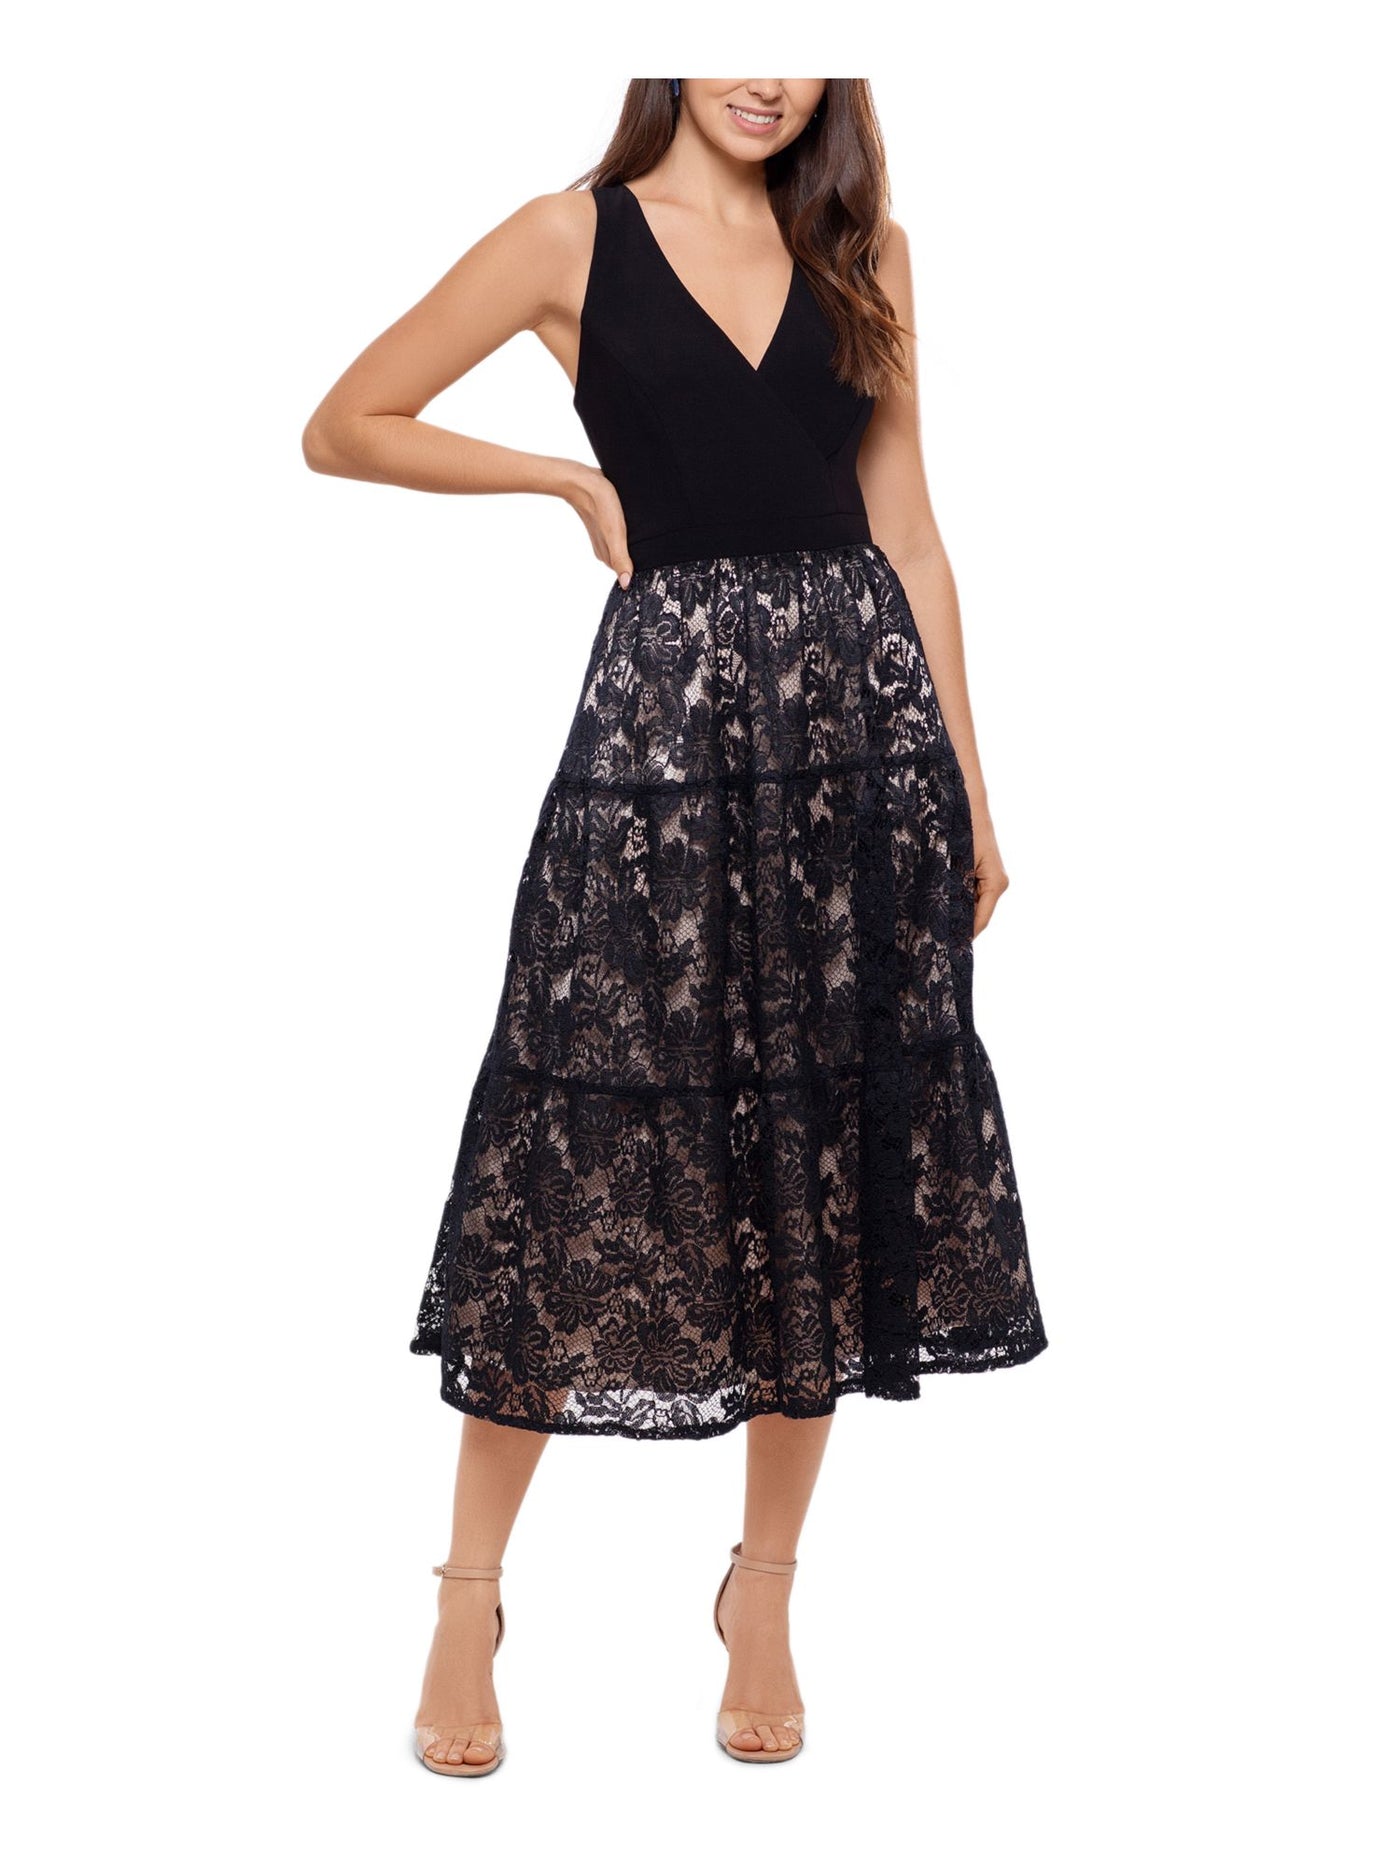 XSCAPE Womens Black Lace Zippered Tiered Lined Sleeveless V Neck Midi Party Fit + Flare Dress 10